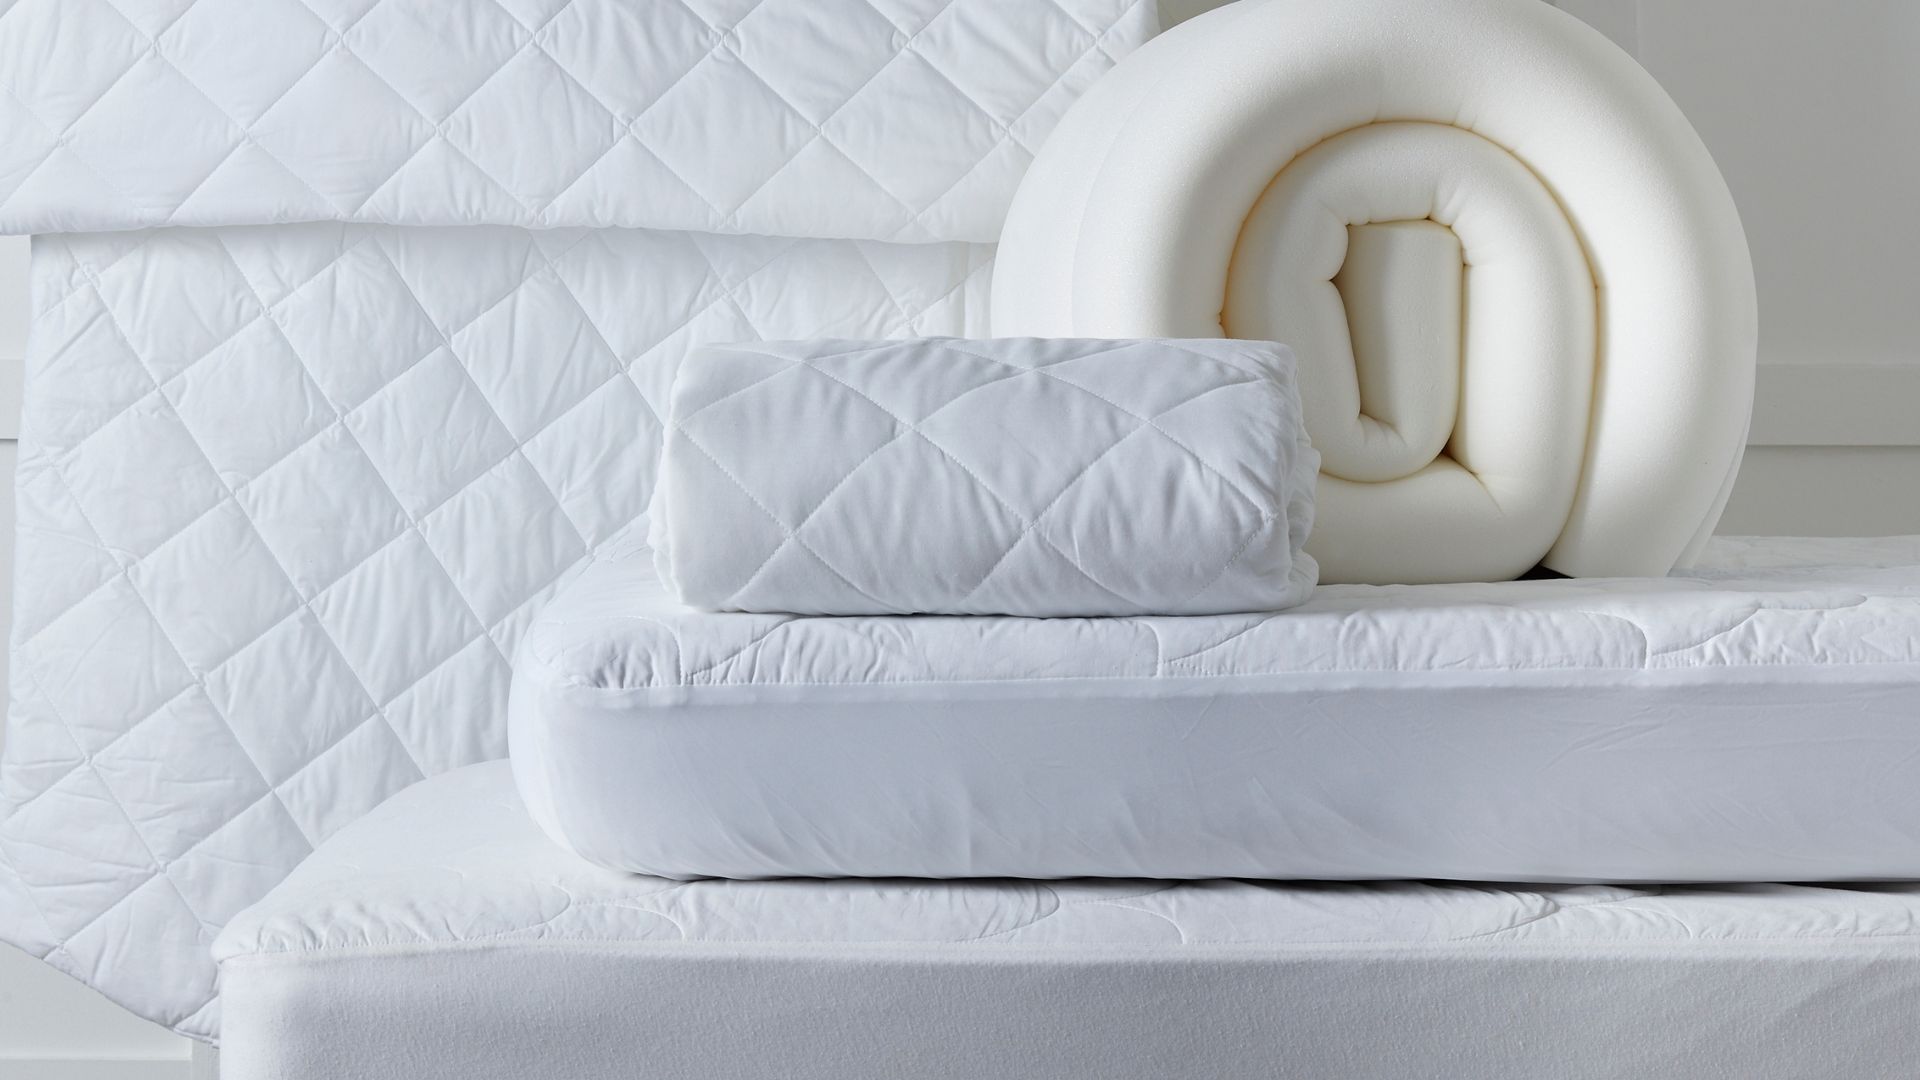 Mattress Topper, Protector Or Underlay? Find The Best Option For You With This Buying Guide